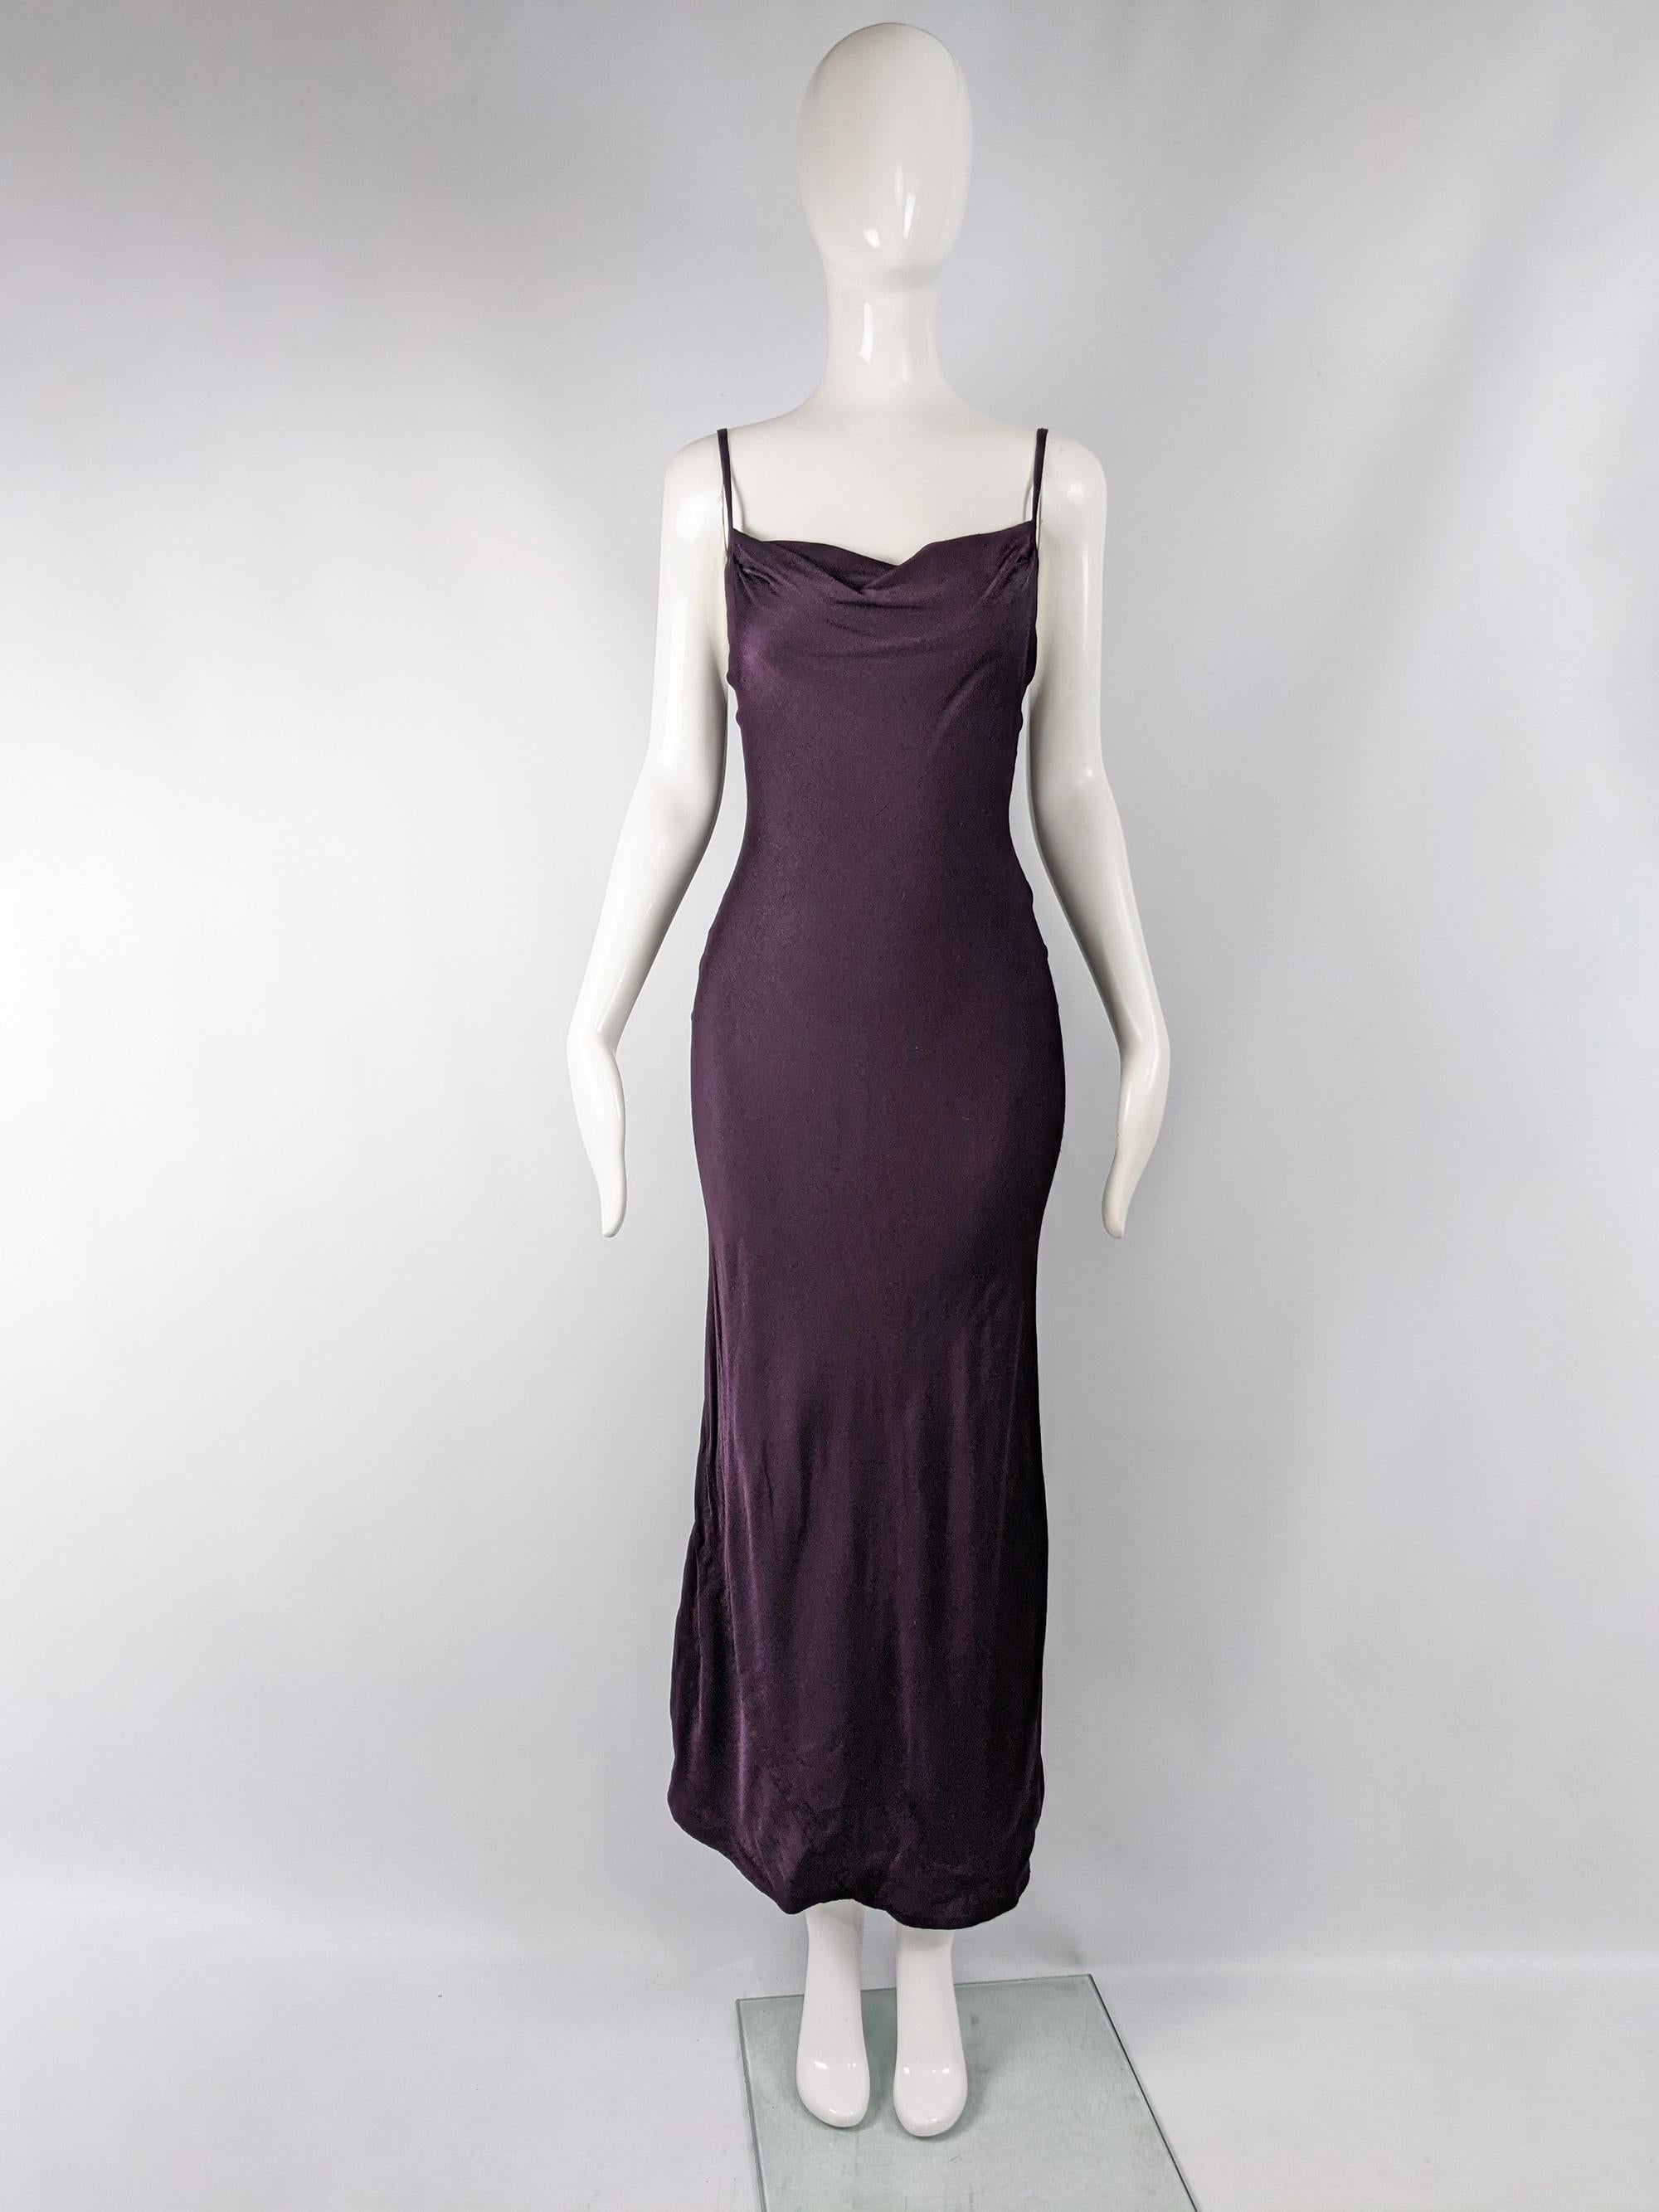 A beautiful vintage womens evening dress from the 1990s by iconic British label, Ghost (from before their takeover). In a bias cut aubergine viscose charmeuse which gives incredible drape. The backless design adds loads of sex appeal while the front